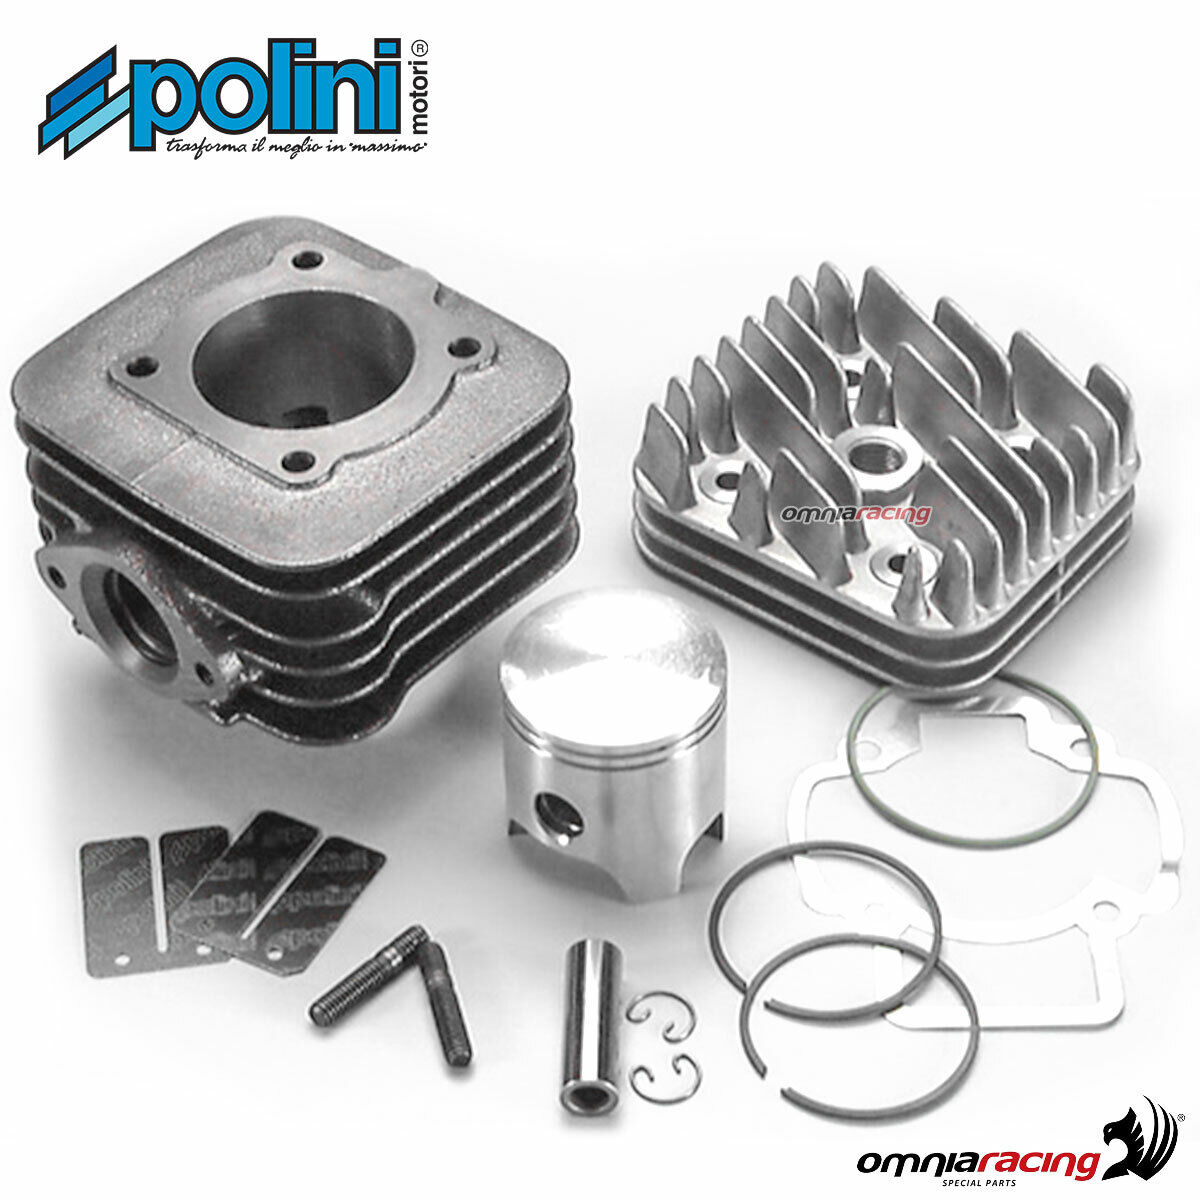 Polini thermal group kit d.47 Recommendation for easy 2t cold 50 OFFicial store gilera moving